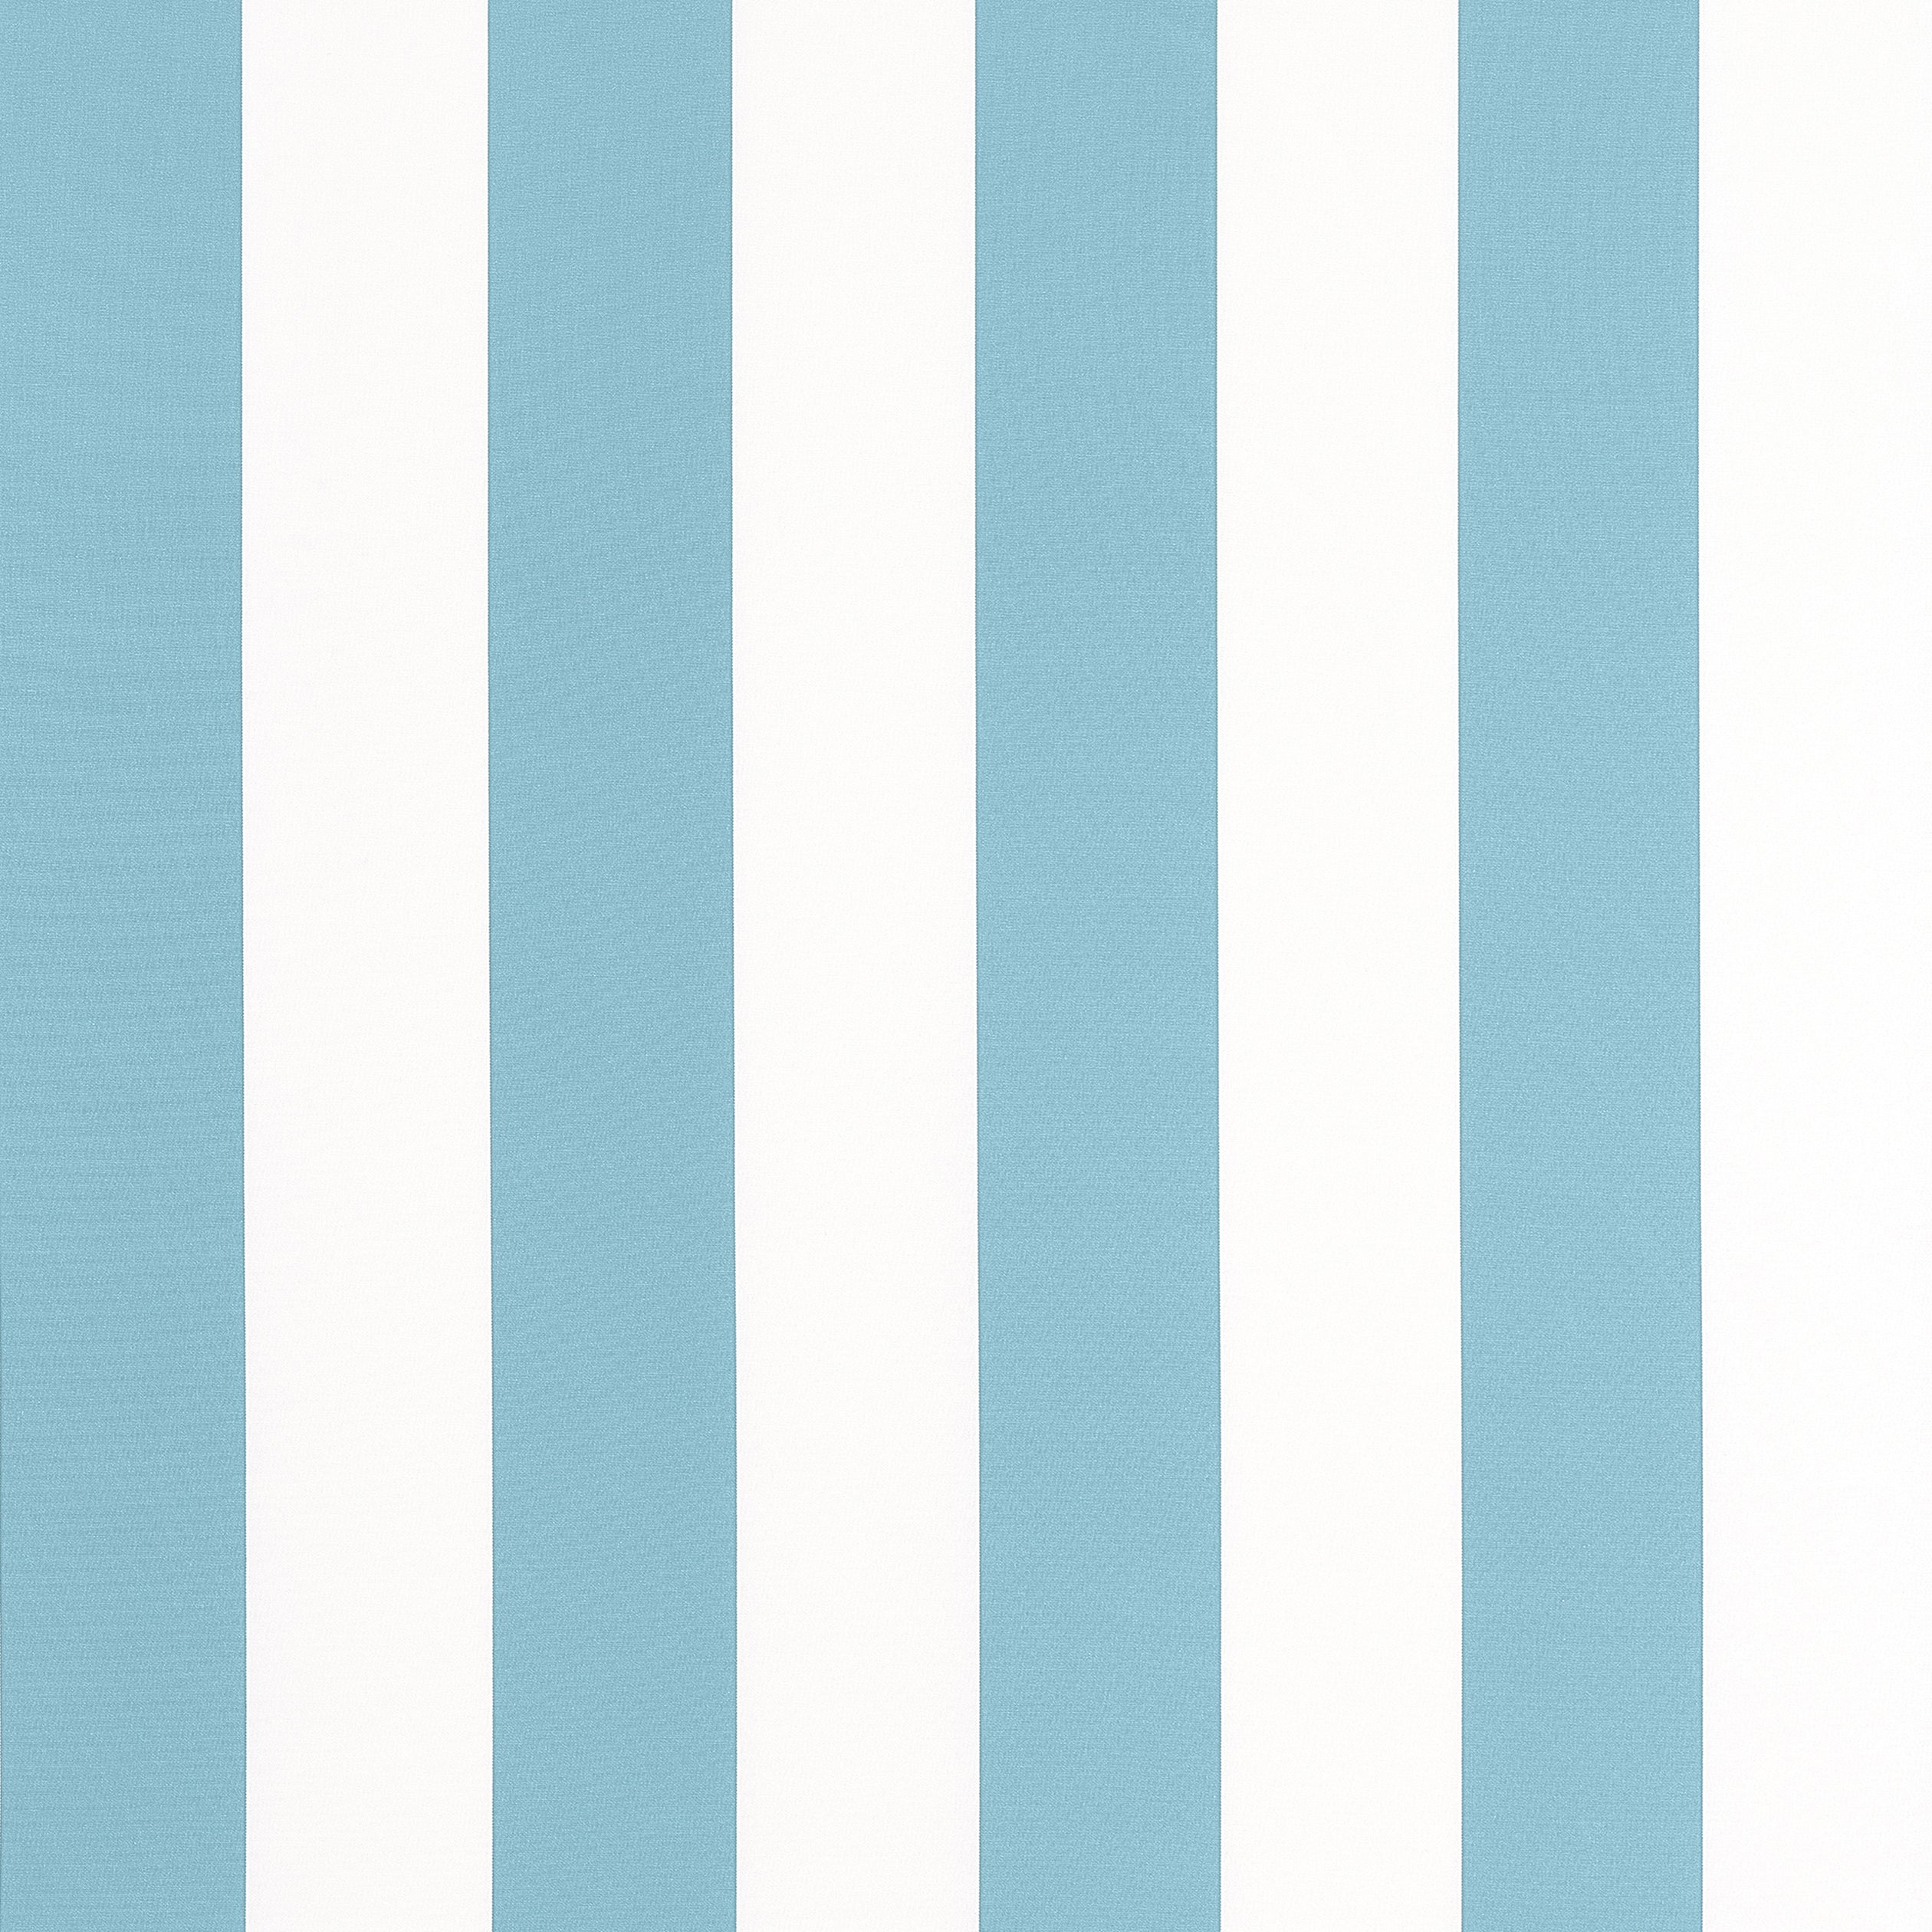 Cabana Stripe fabric in spa blue color - pattern number W81635 - by Thibaut in the Locale collection